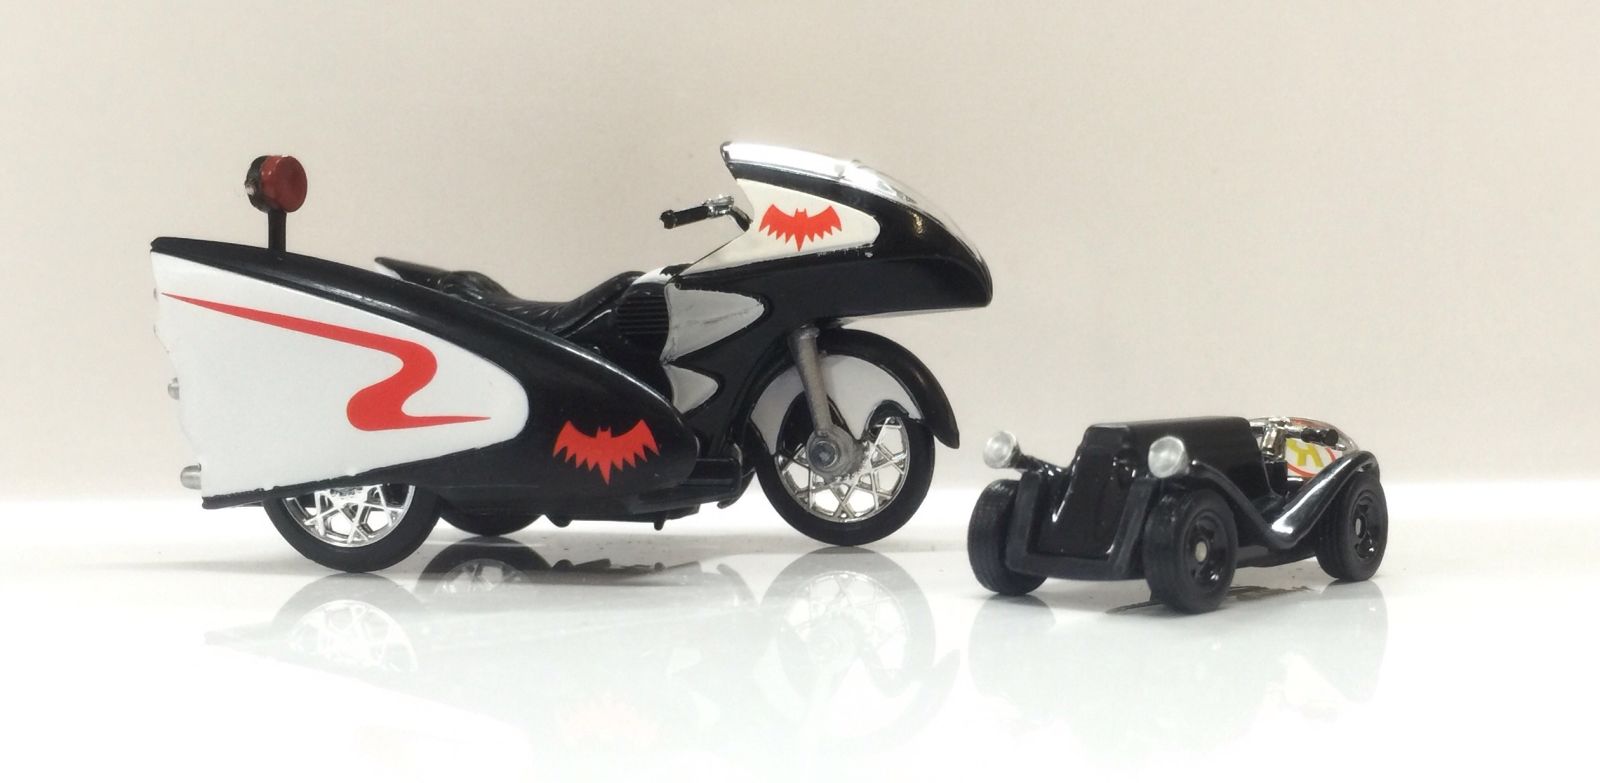 Illustration for article titled Batcycle; Why I like the DLM